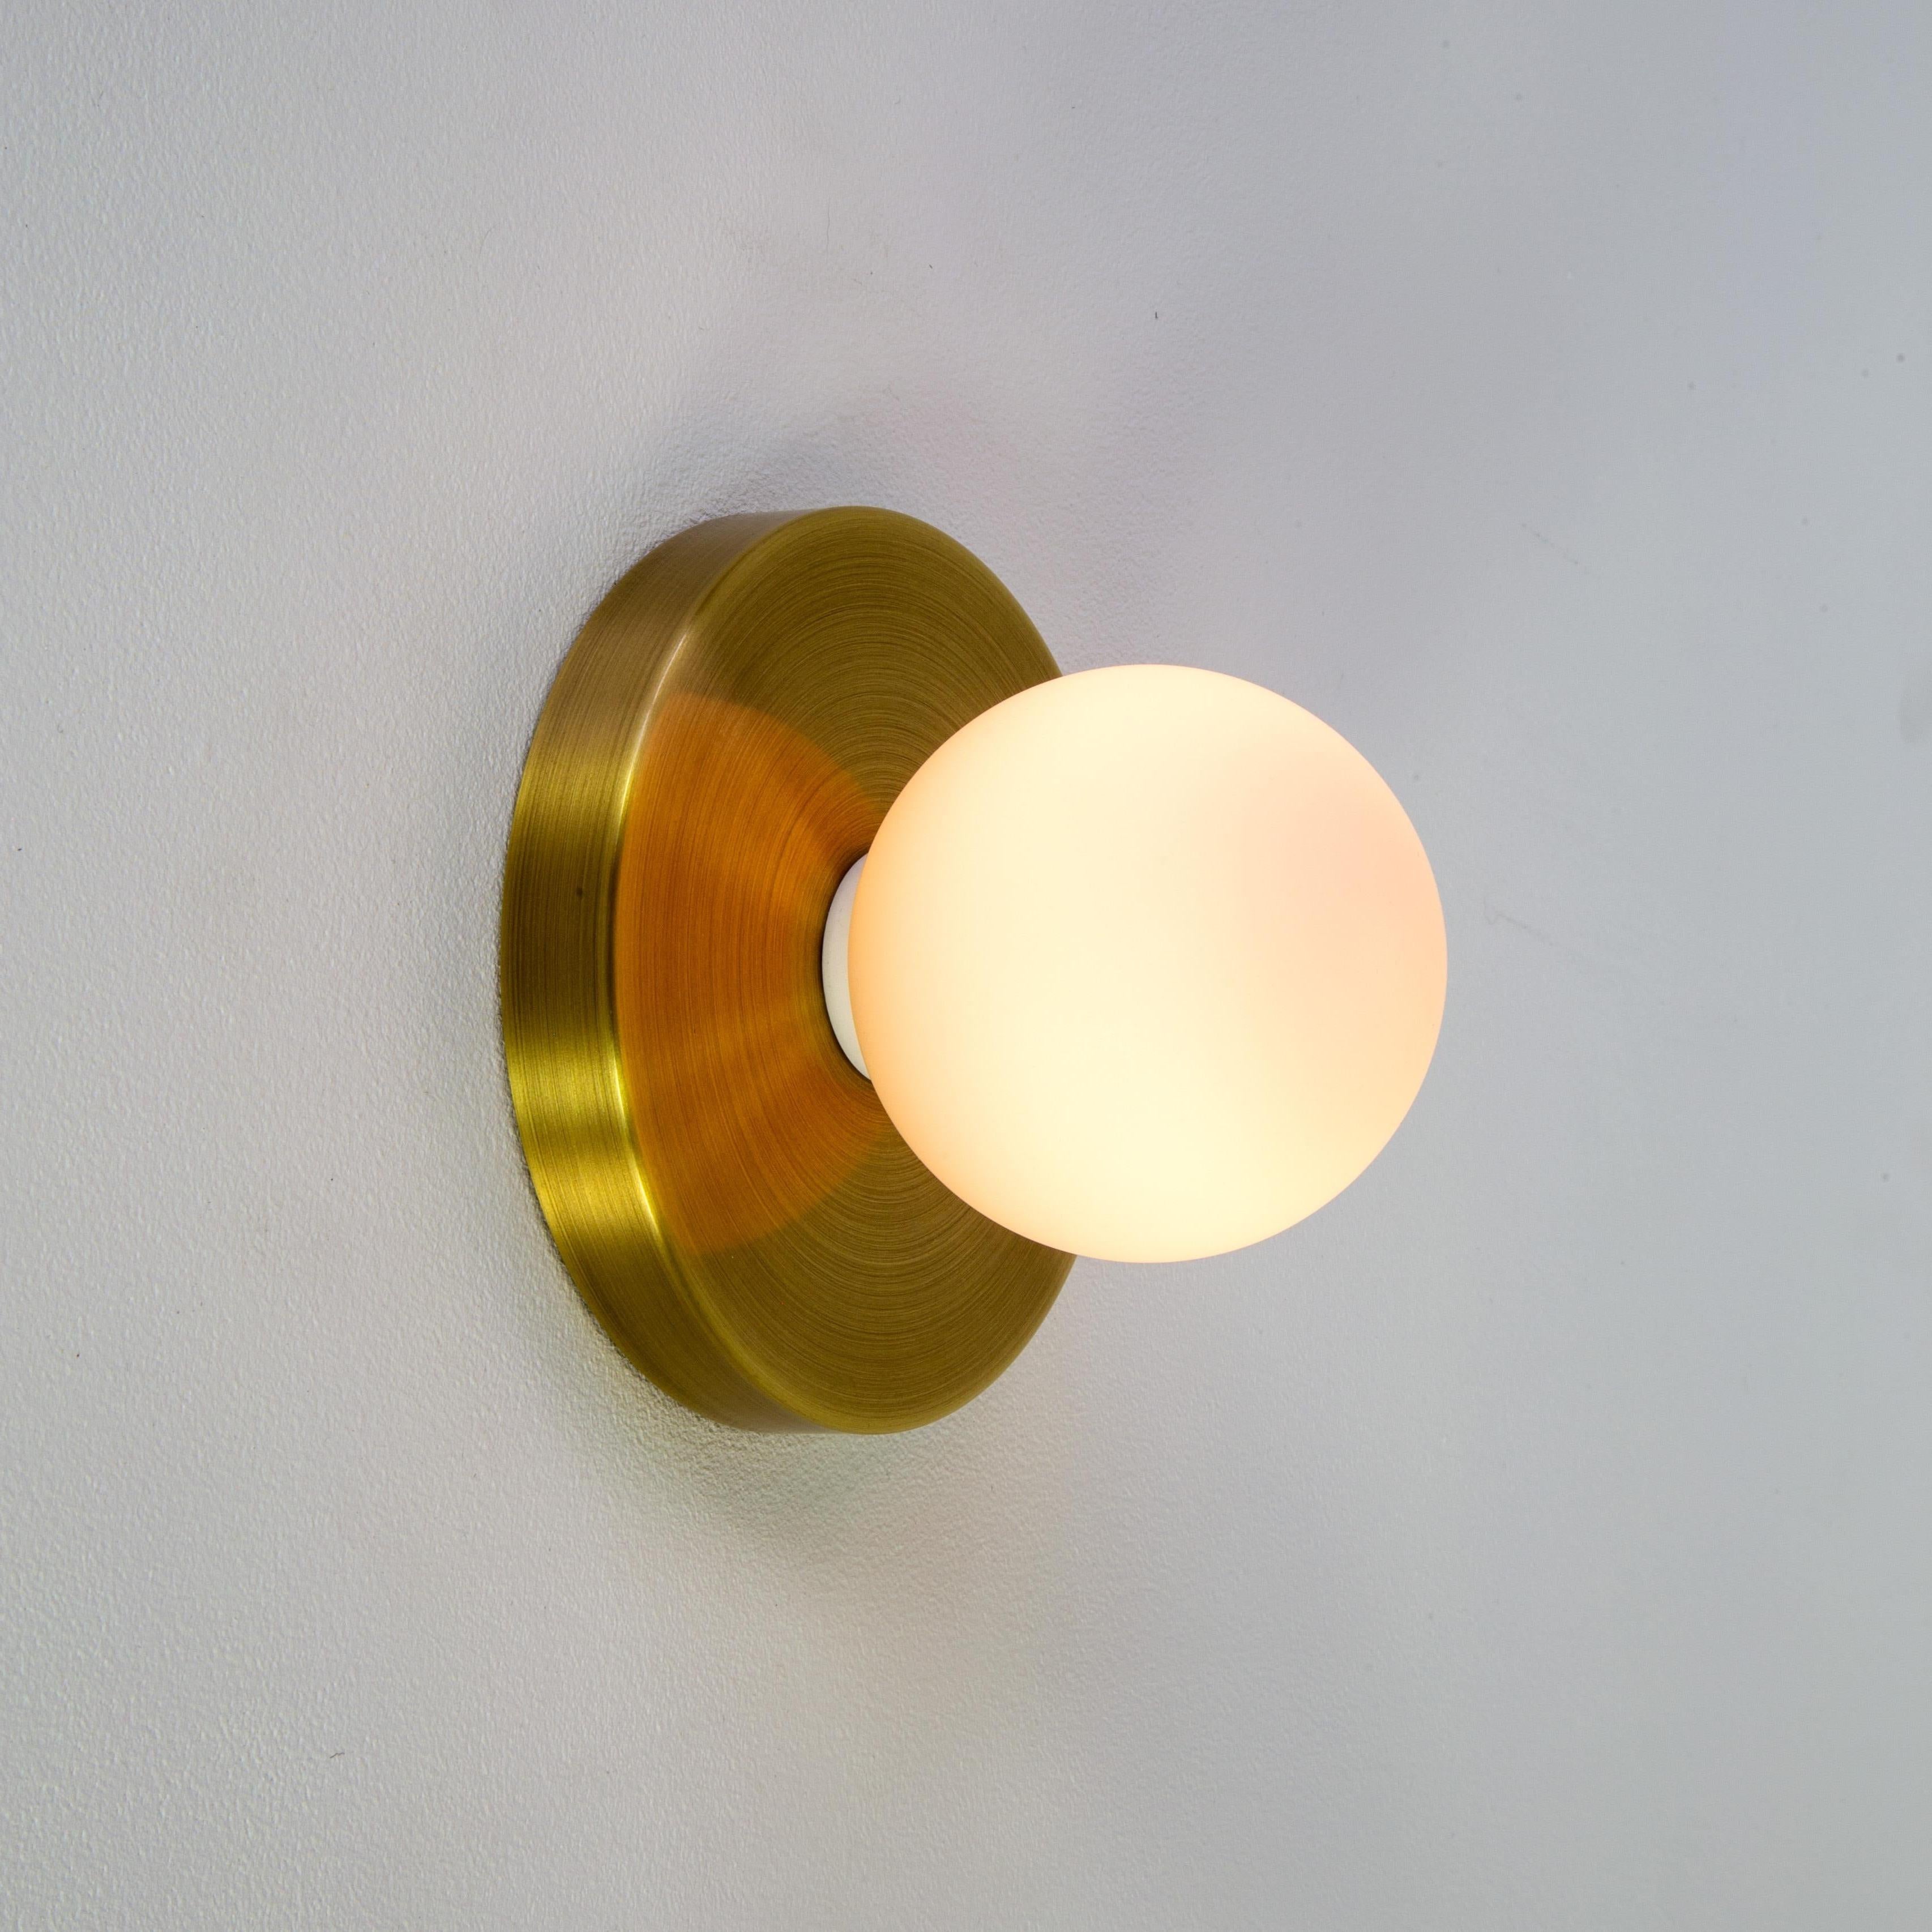 Modern Set of 4 Globe Sconces by Research.Lighting, Brushed Brass, Made to Order For Sale